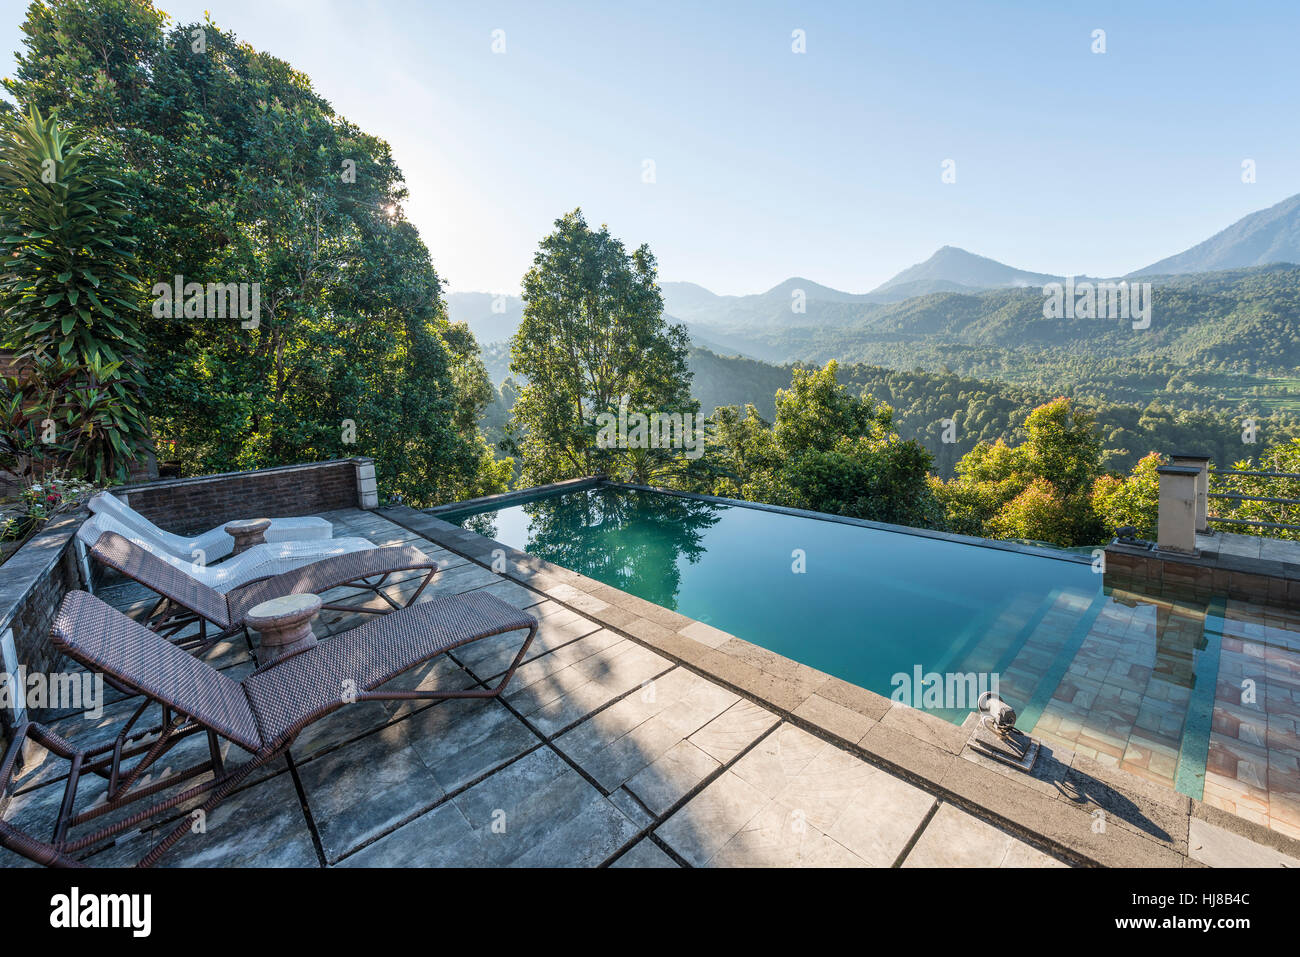 Landscape, swimming pool with deck chairs, hills, Munduk, Bali, Indonesia Stock Photo